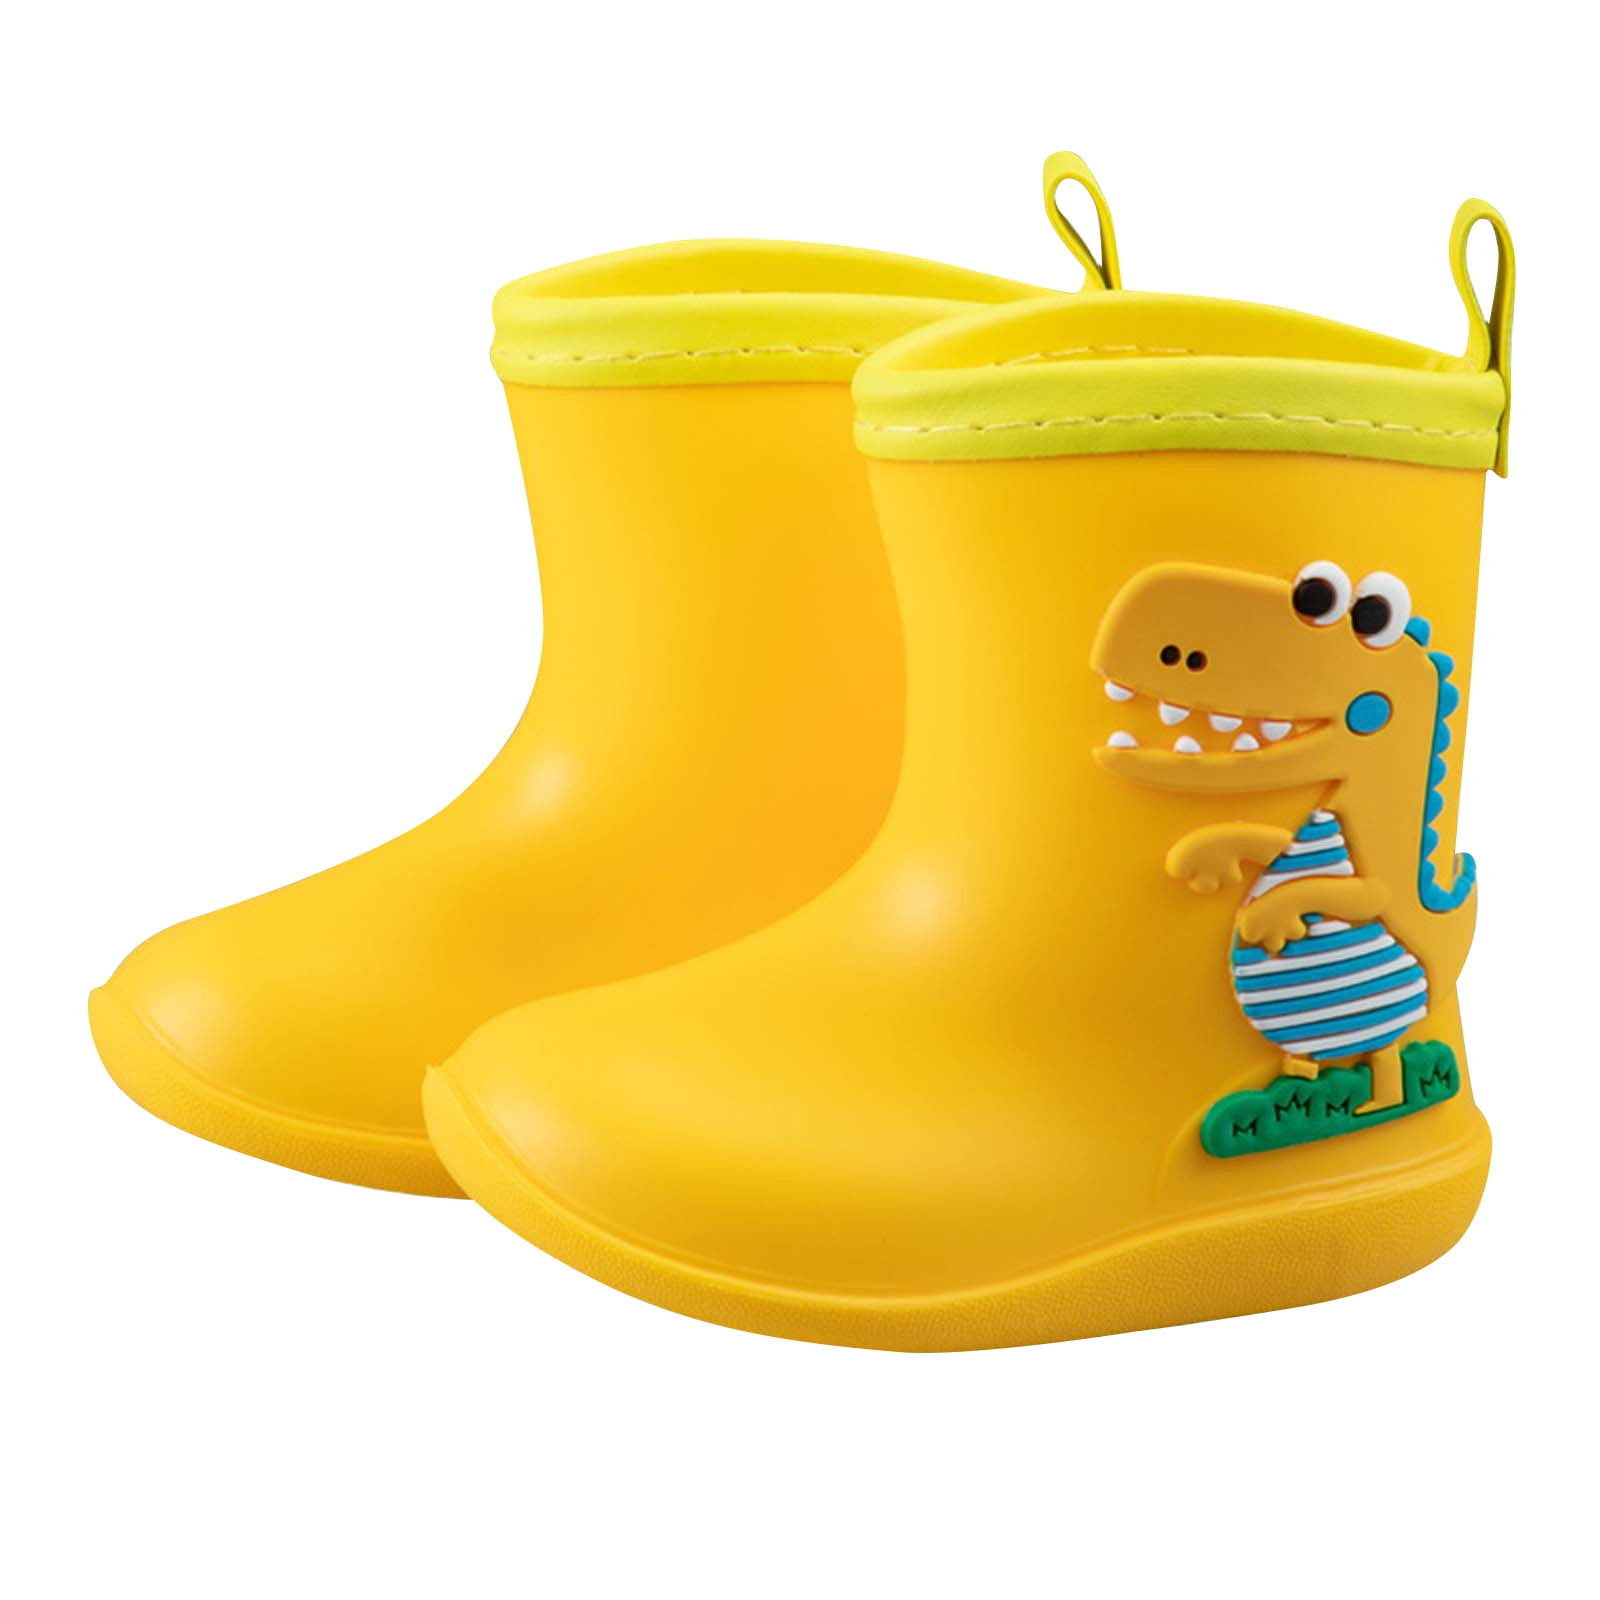 Kids Rain Boots For Toddler Little Boys And Girls Waterproof Dinosaur Rain Shoes Kid Ankle Boots Rainboots With Handles 1901 Dinosaur 1.5 